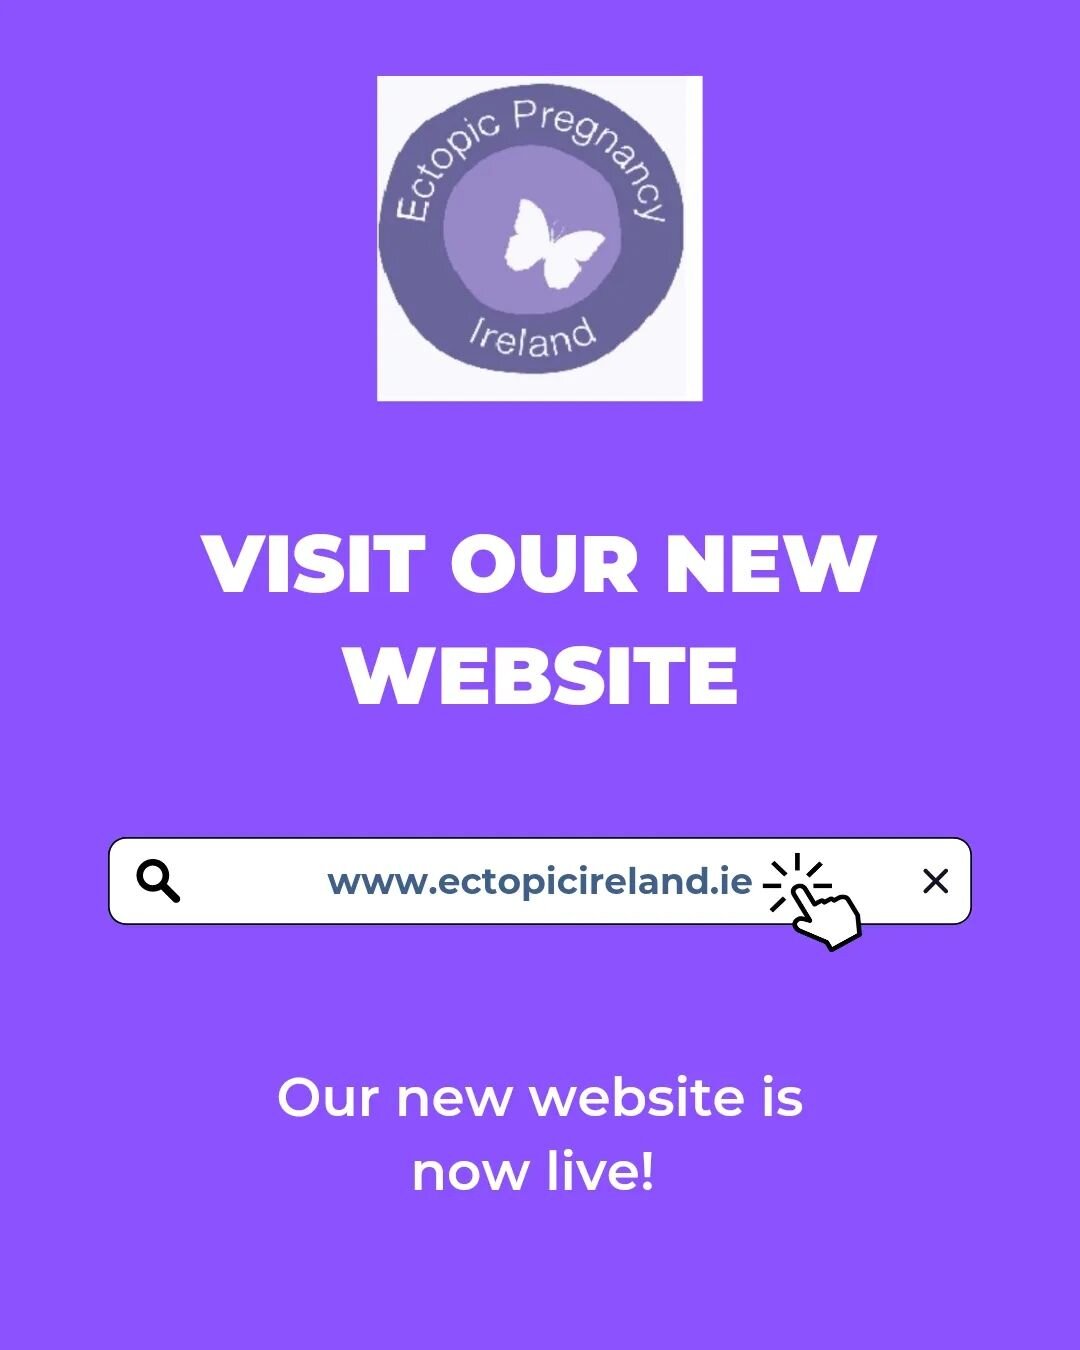 Our new website is now live! 

Go check it out and let us know what you think! 

All of our contact information is listed and you now have the option to sign our guest book too! 

Link is in our bio!

www.ectopicireland.ie 

#ectopicpregnancy #ectopi